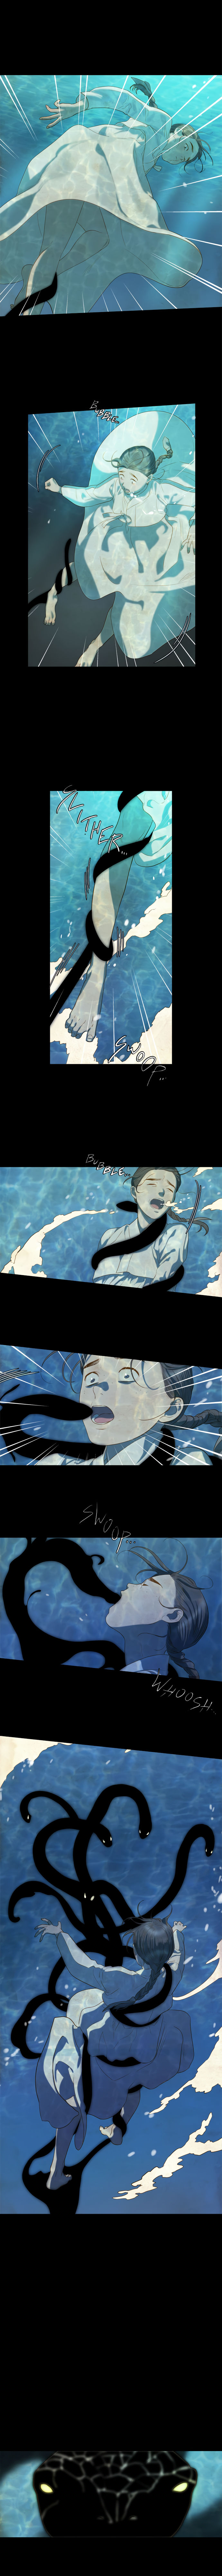 Gorae Byul - The Gyeongseong Mermaid - Chapter 10 Page 2